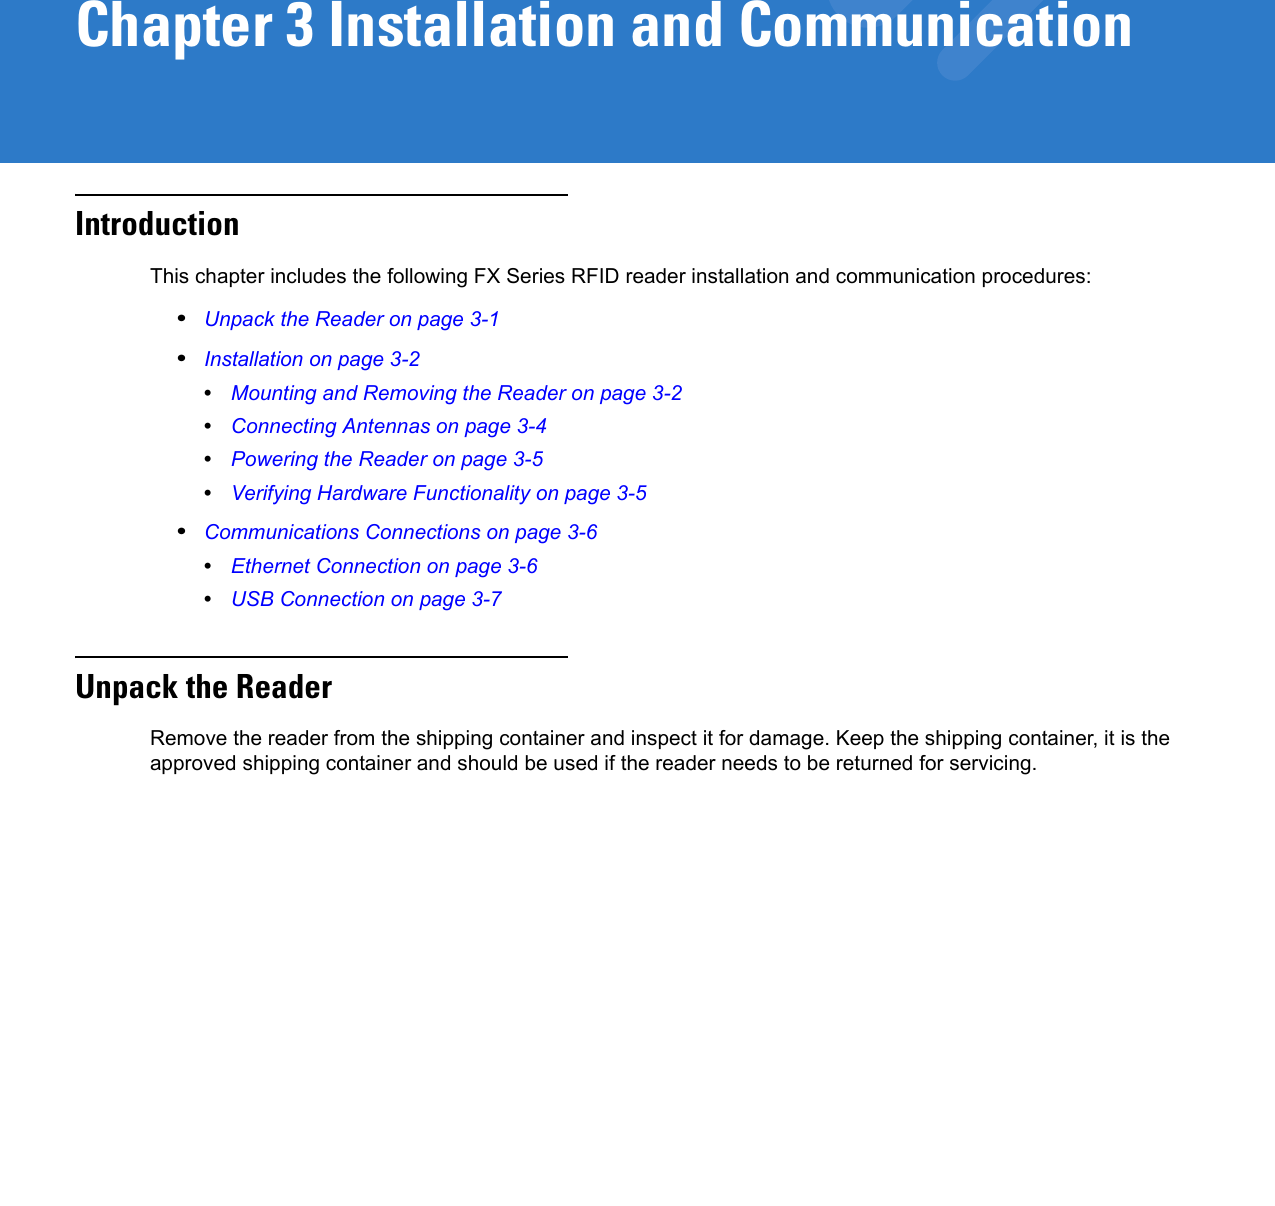 Chapter 3 Installation and CommunicationIntroductionThis chapter includes the following FX Series RFID reader installation and communication procedures:•Unpack the Reader on page 3-1•Installation on page 3-2•Mounting and Removing the Reader on page 3-2•Connecting Antennas on page 3-4•Powering the Reader on page 3-5•Verifying Hardware Functionality on page 3-5•Communications Connections on page 3-6•Ethernet Connection on page 3-6•USB Connection on page 3-7Unpack the ReaderRemove the reader from the shipping container and inspect it for damage. Keep the shipping container, it is the approved shipping container and should be used if the reader needs to be returned for servicing.